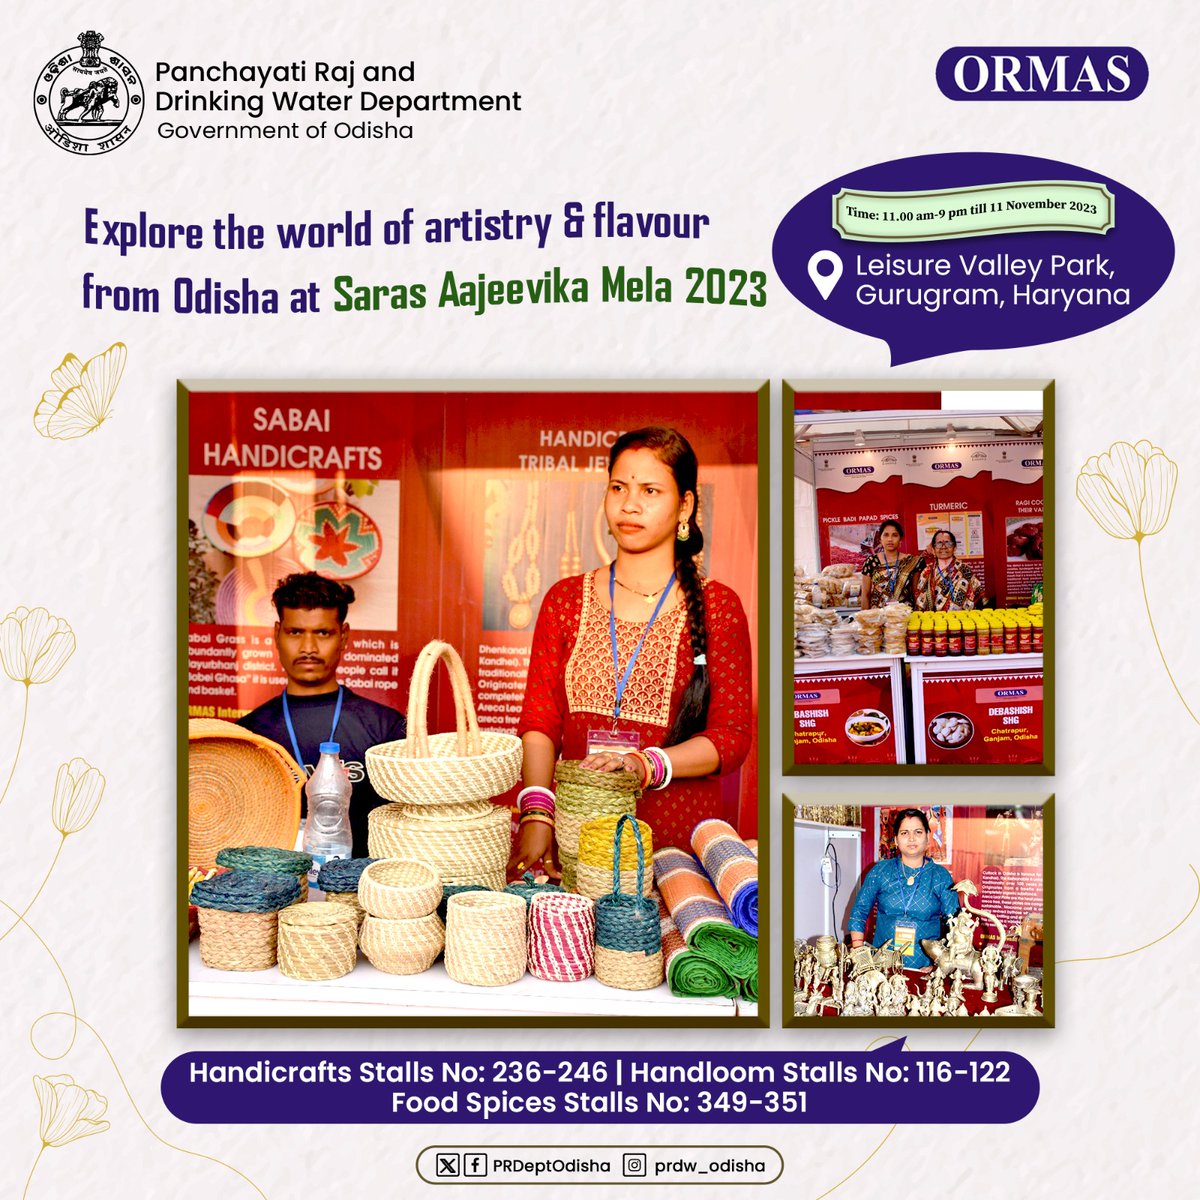 Experience the magic of @ormas_odisha stalls at #SarasAajeevikaMela2023 at Leisure Valley Park, Gurugram, Haryana. Discover timeless handloom, handicrafts & aromatic food spices prepared by #WomenProducerGroups from #Odisha.
#SarasMeinHum #OdishaHandloom #OdishaHandicraft